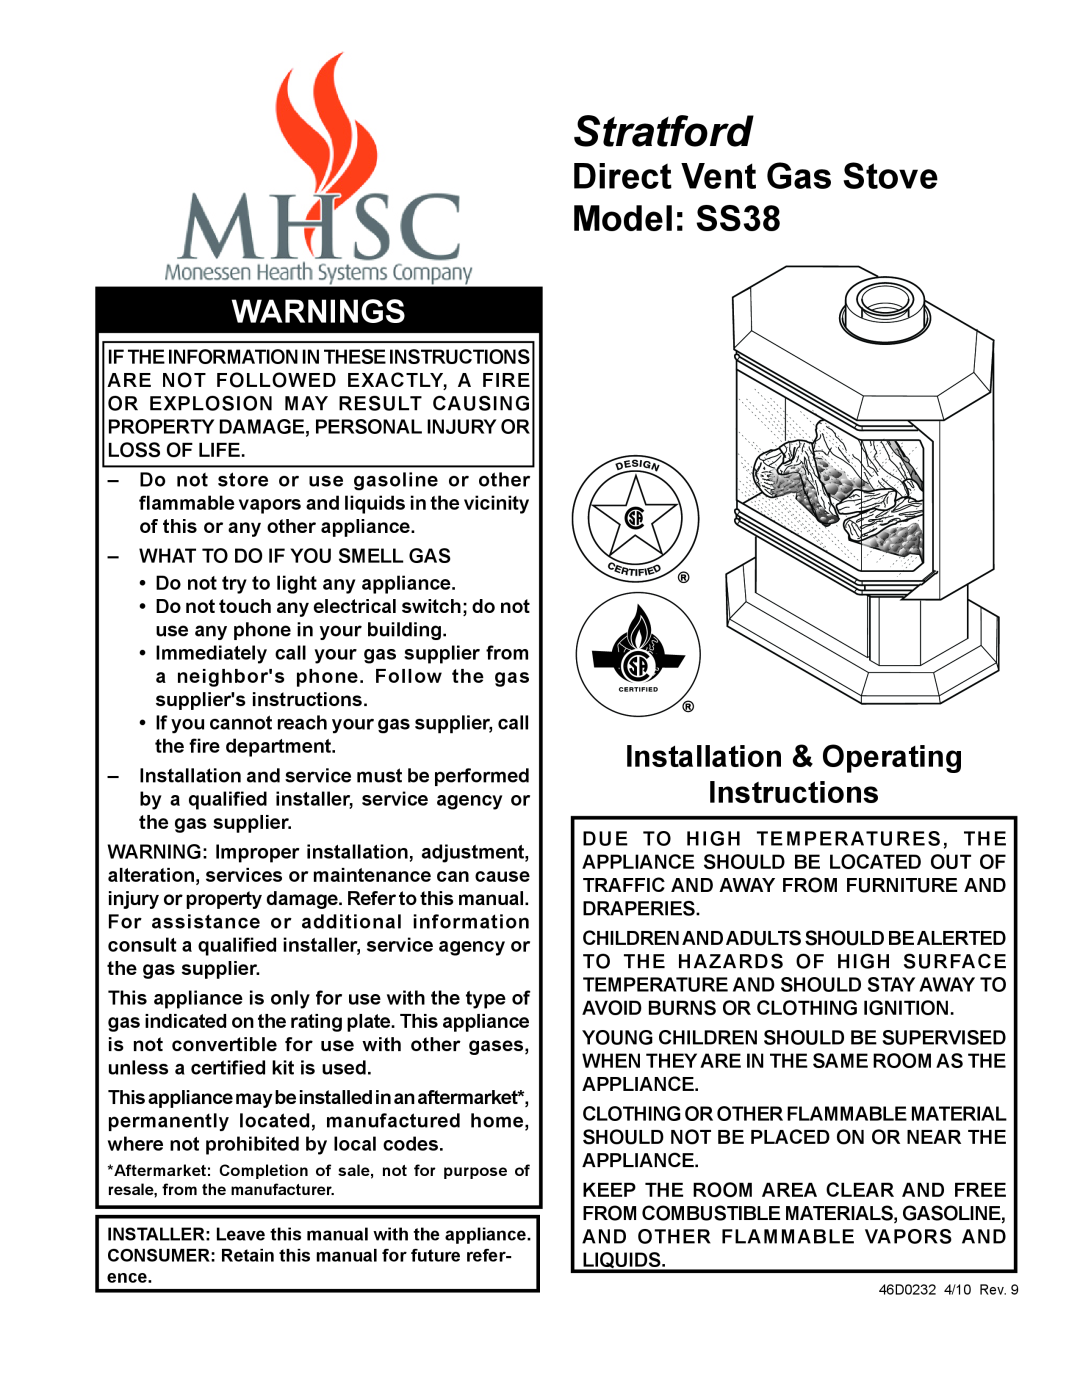 Monessen Hearth operating instructions Stratford, Direct Vent Gas Stove Model SS38, Warnings 